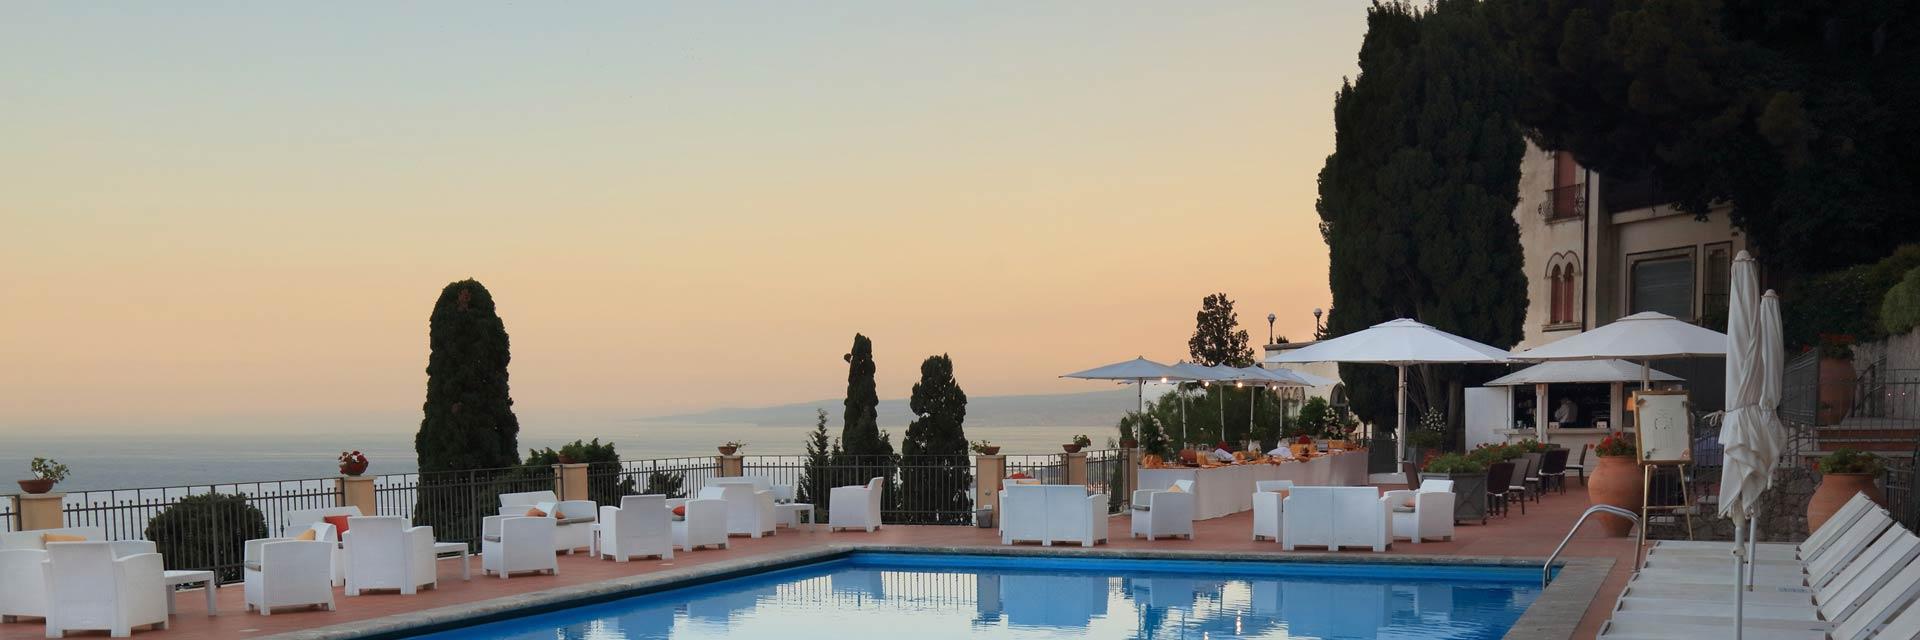 sanpietrotaormina en offer-for-day-use-in-taormina-including-pool-access-and-lunch 010